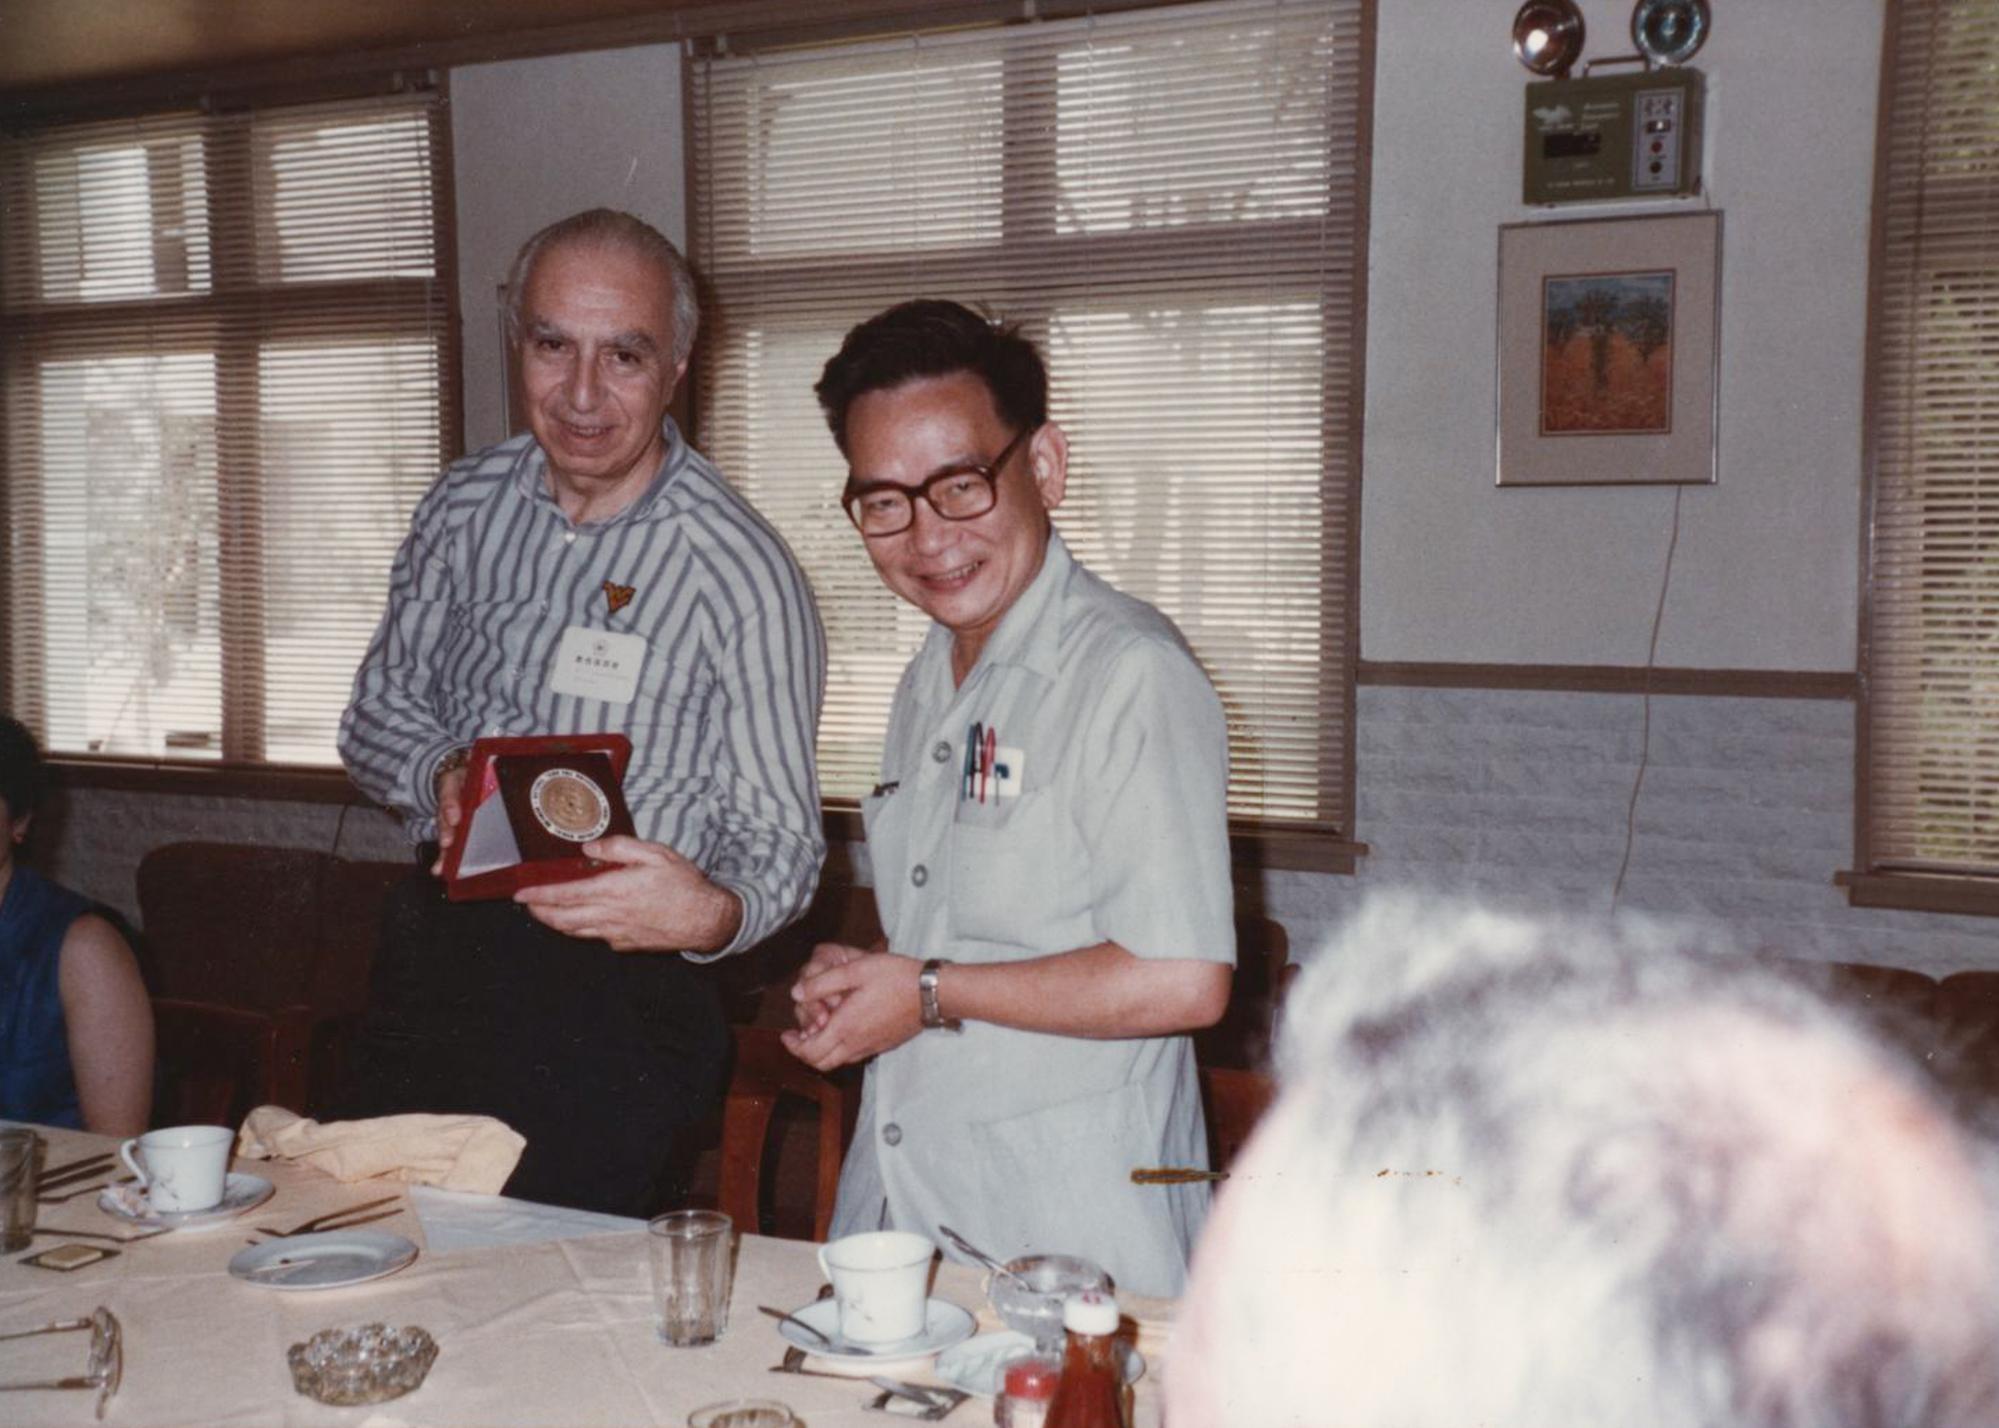 In 1985, Professor Yi-Yan Li (李怡嚴) (right) hosted the Secretary of Education during his tenure as the Dean of Academic Affairs.